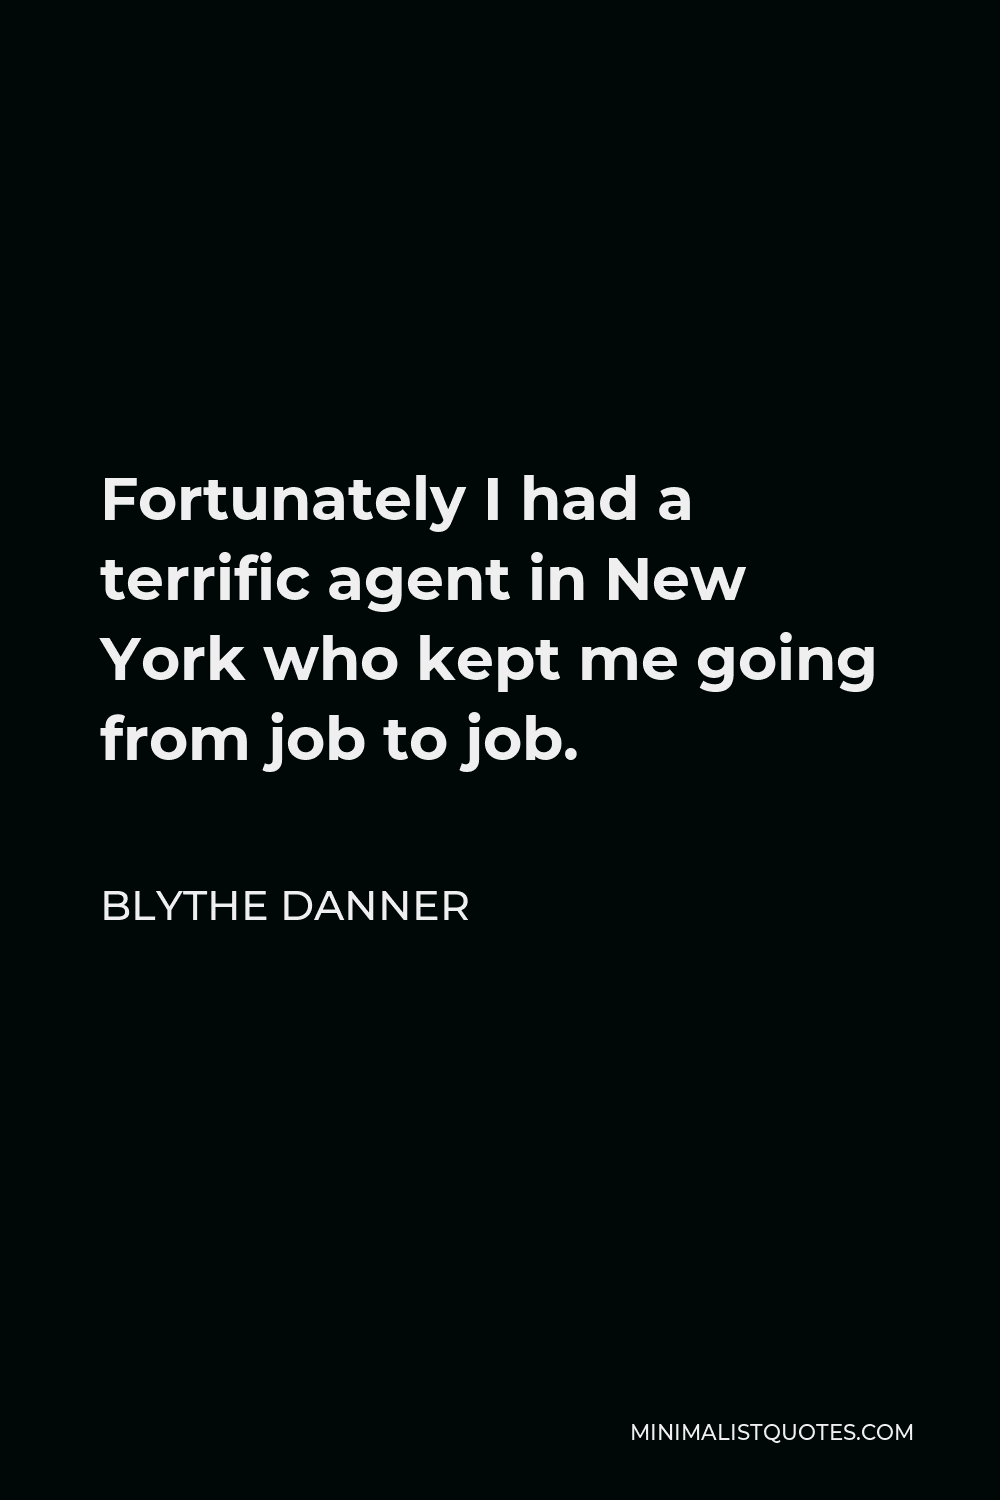 Blythe Danner Quote - Fortunately I had a terrific agent in New York who kept me going from job to job.